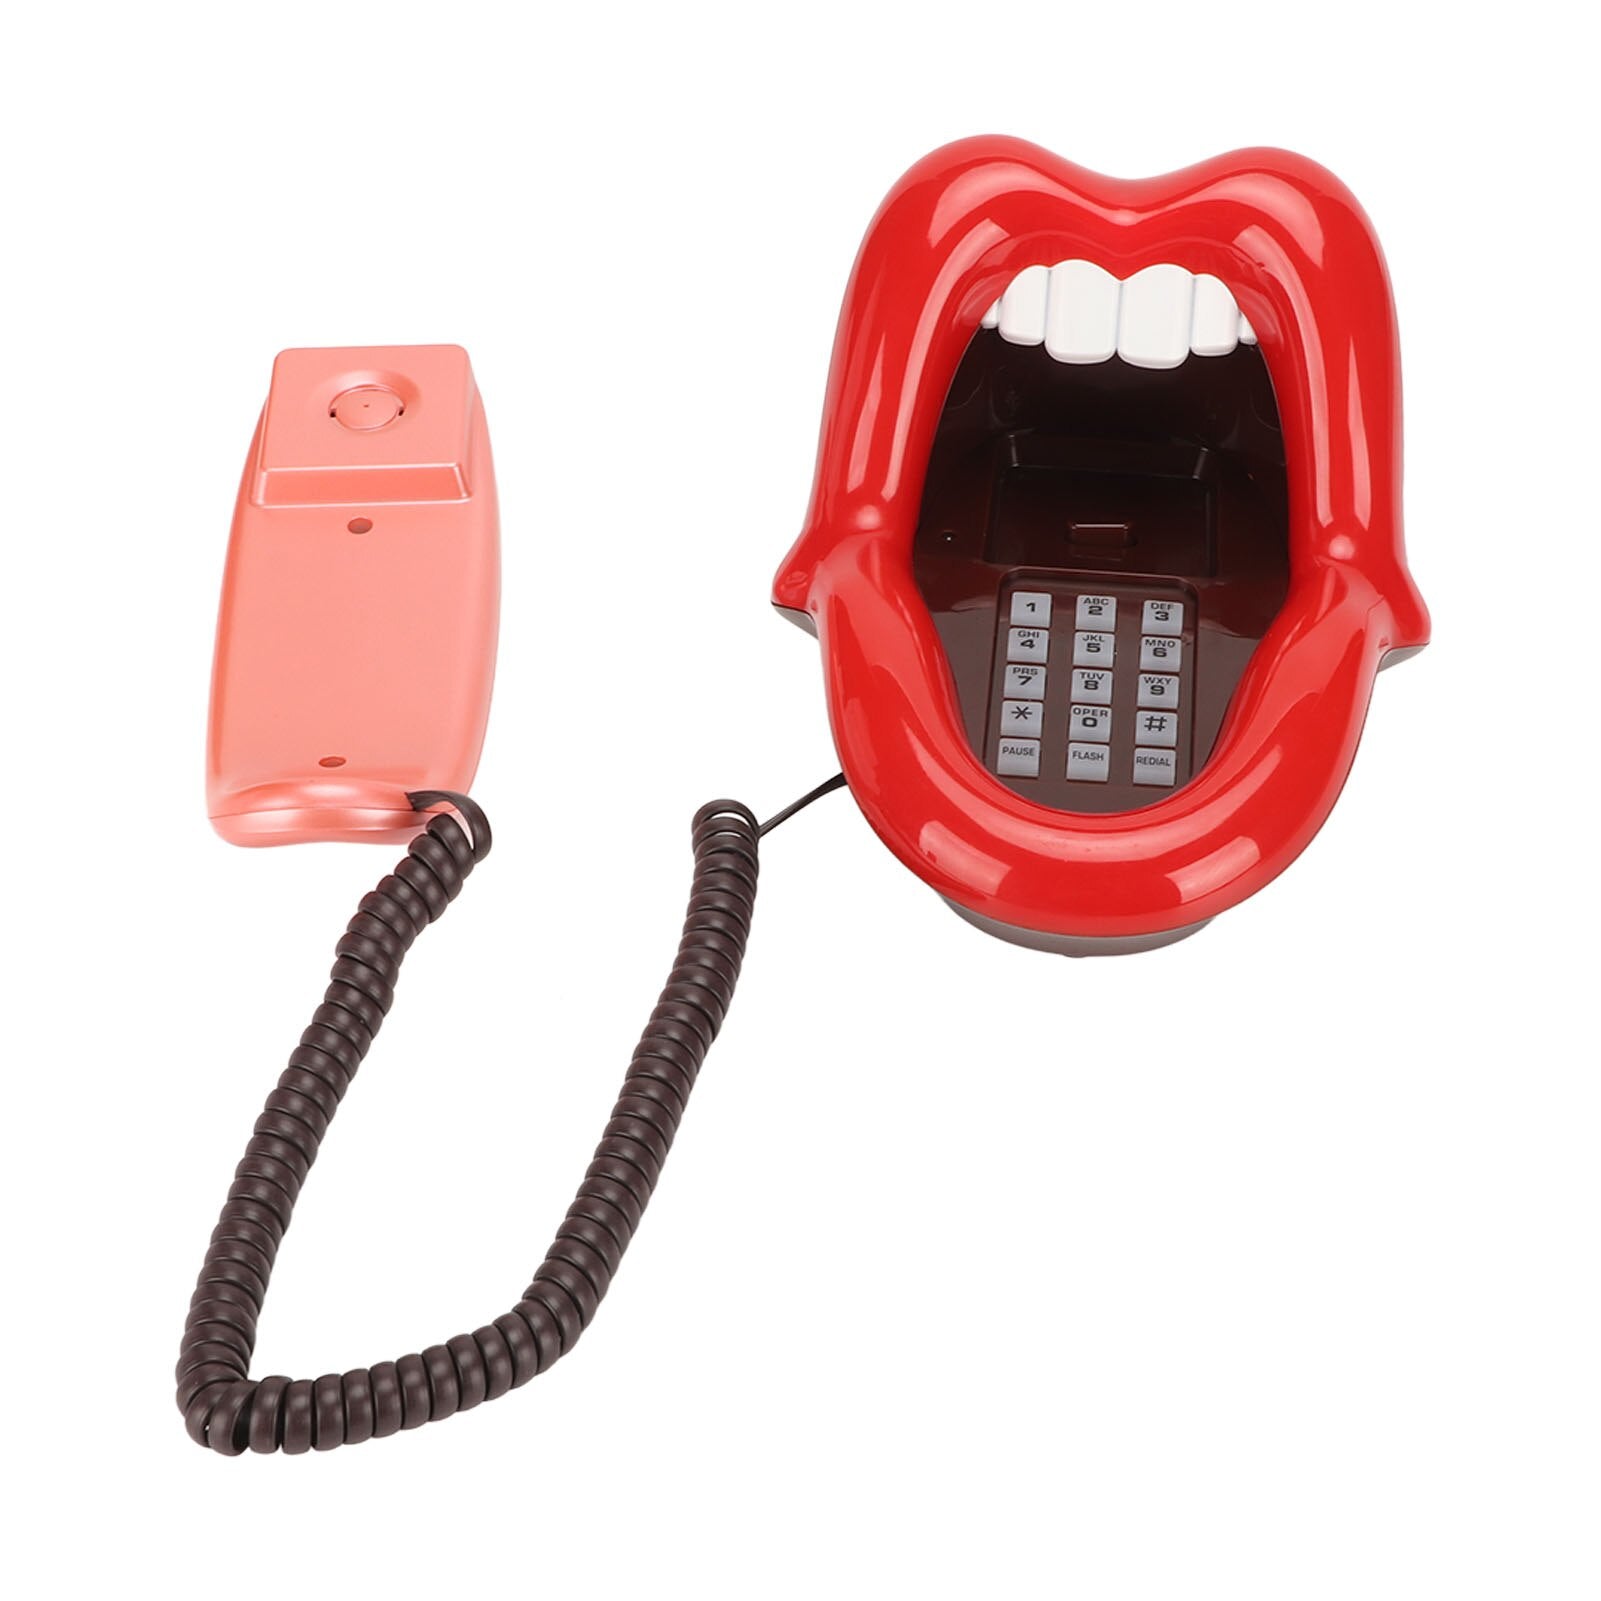 Novelty Tongue Stretching Sexy Lips Mouth Corded Phone with LED Indicator, Mini Landline Telephone for Home and Office Decor